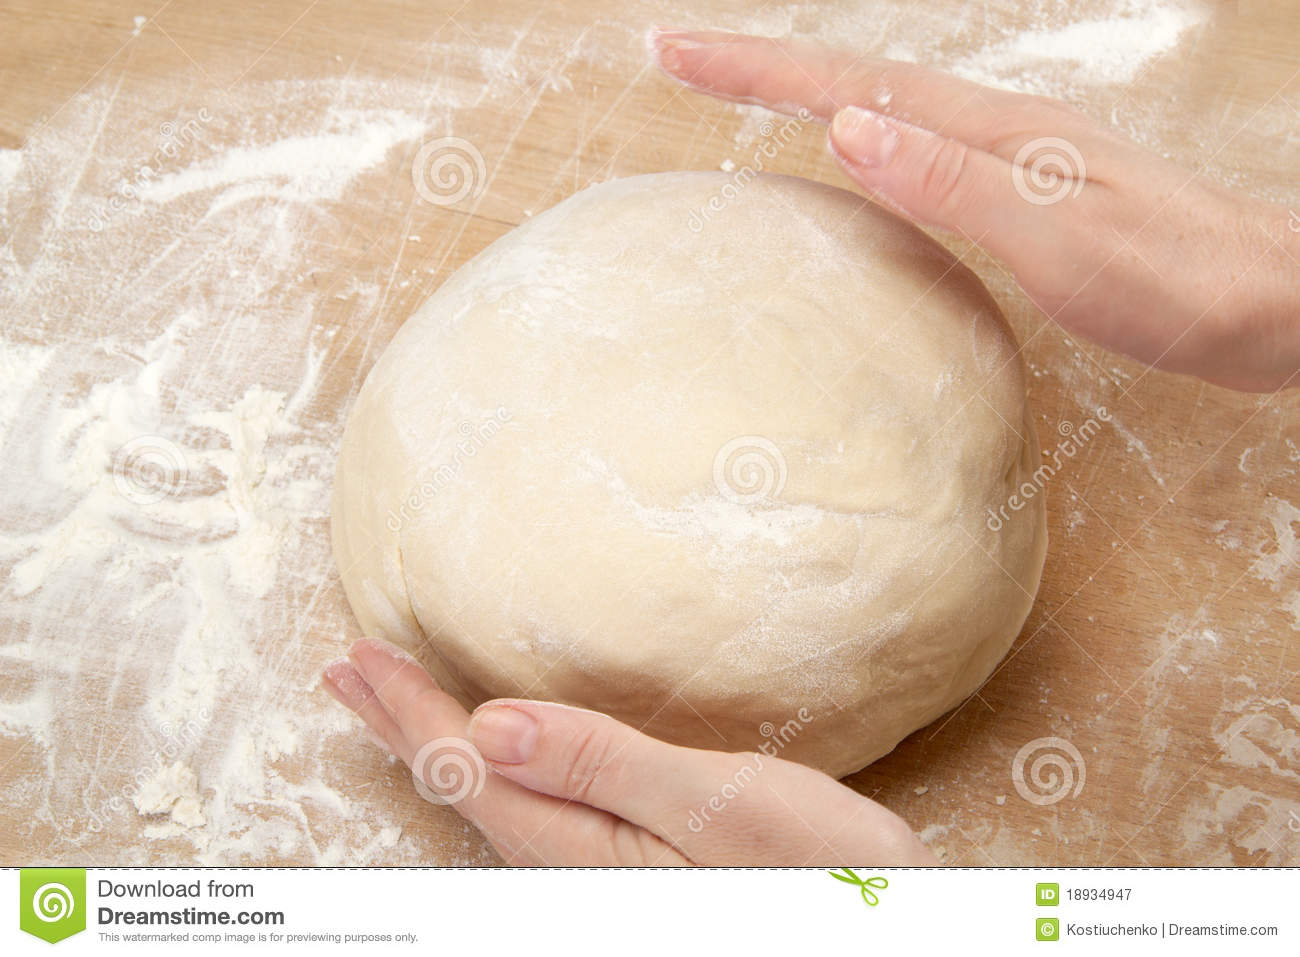 Kneading Dough Royalty Free Stock Photography   Image  18934947